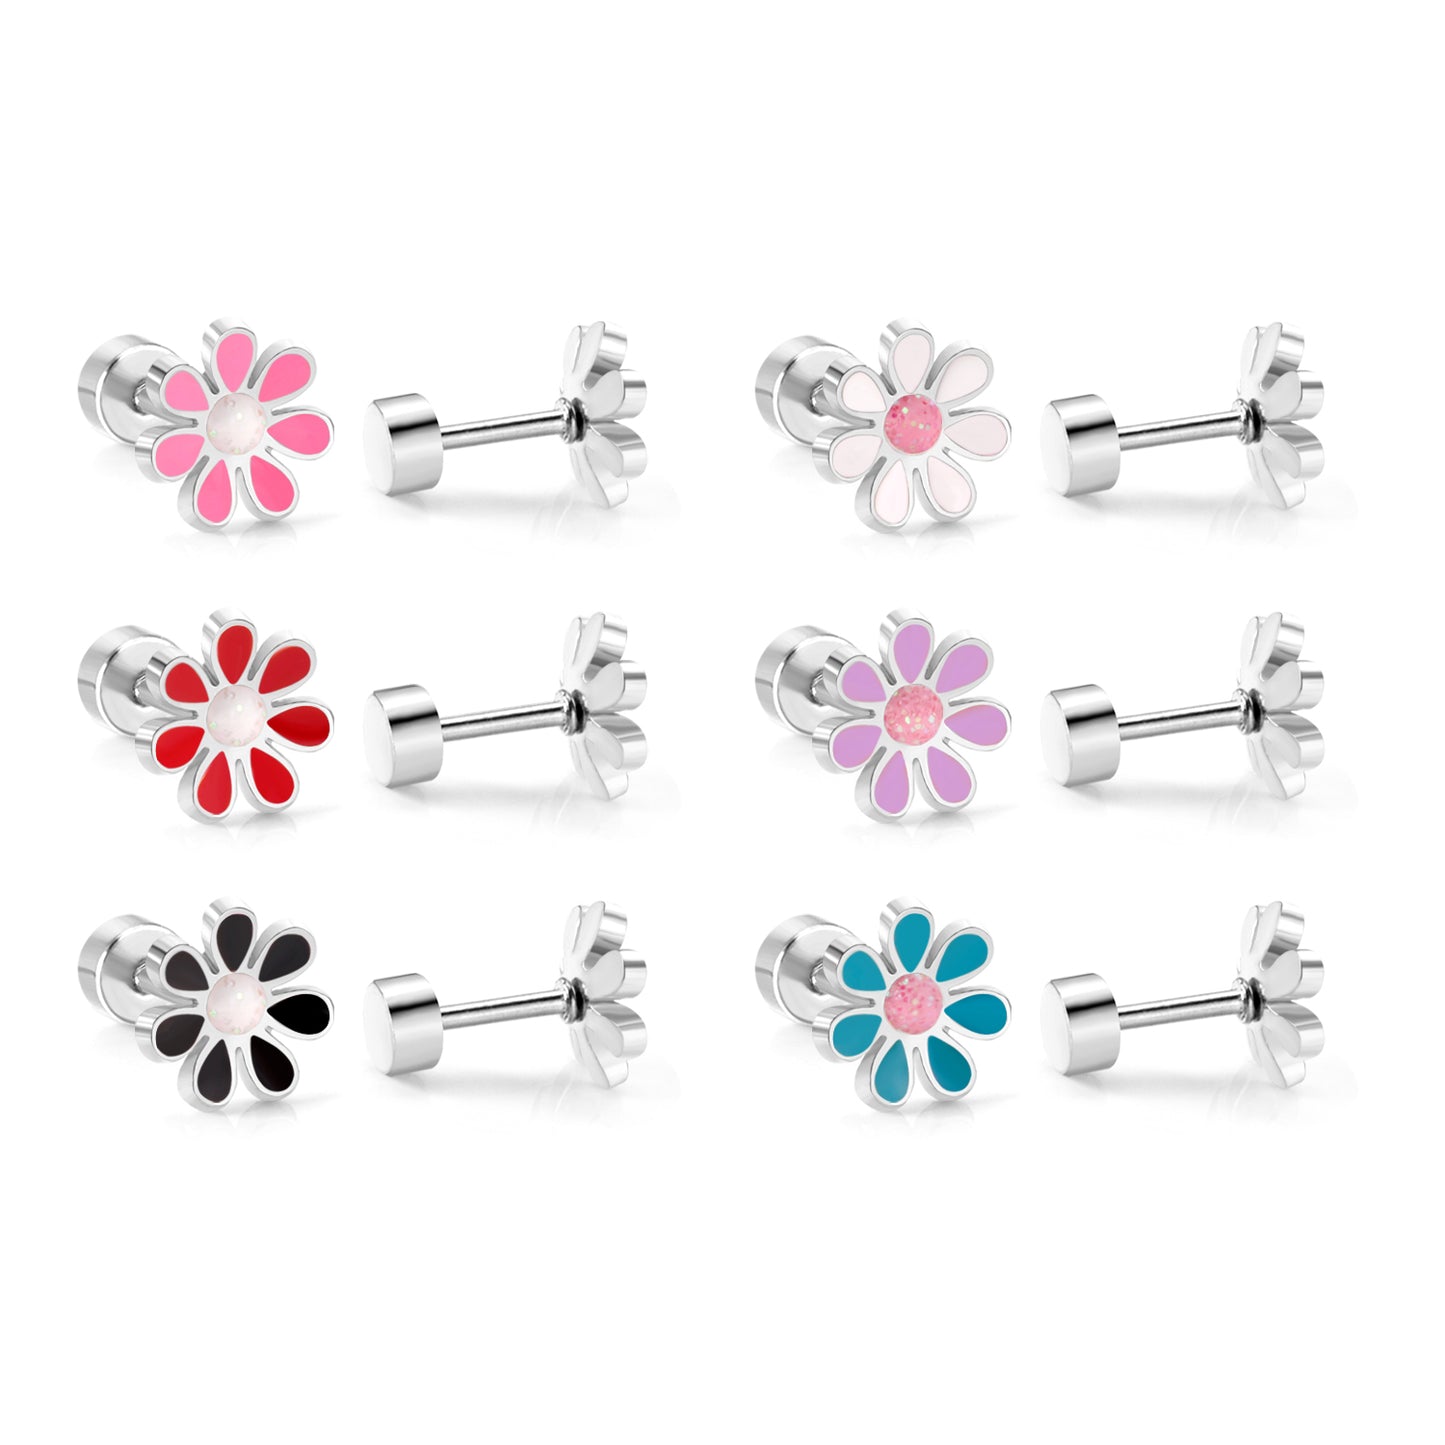 Children's Earrings:  Surgical Steel Blue/Pink Flowers with Screw Backs